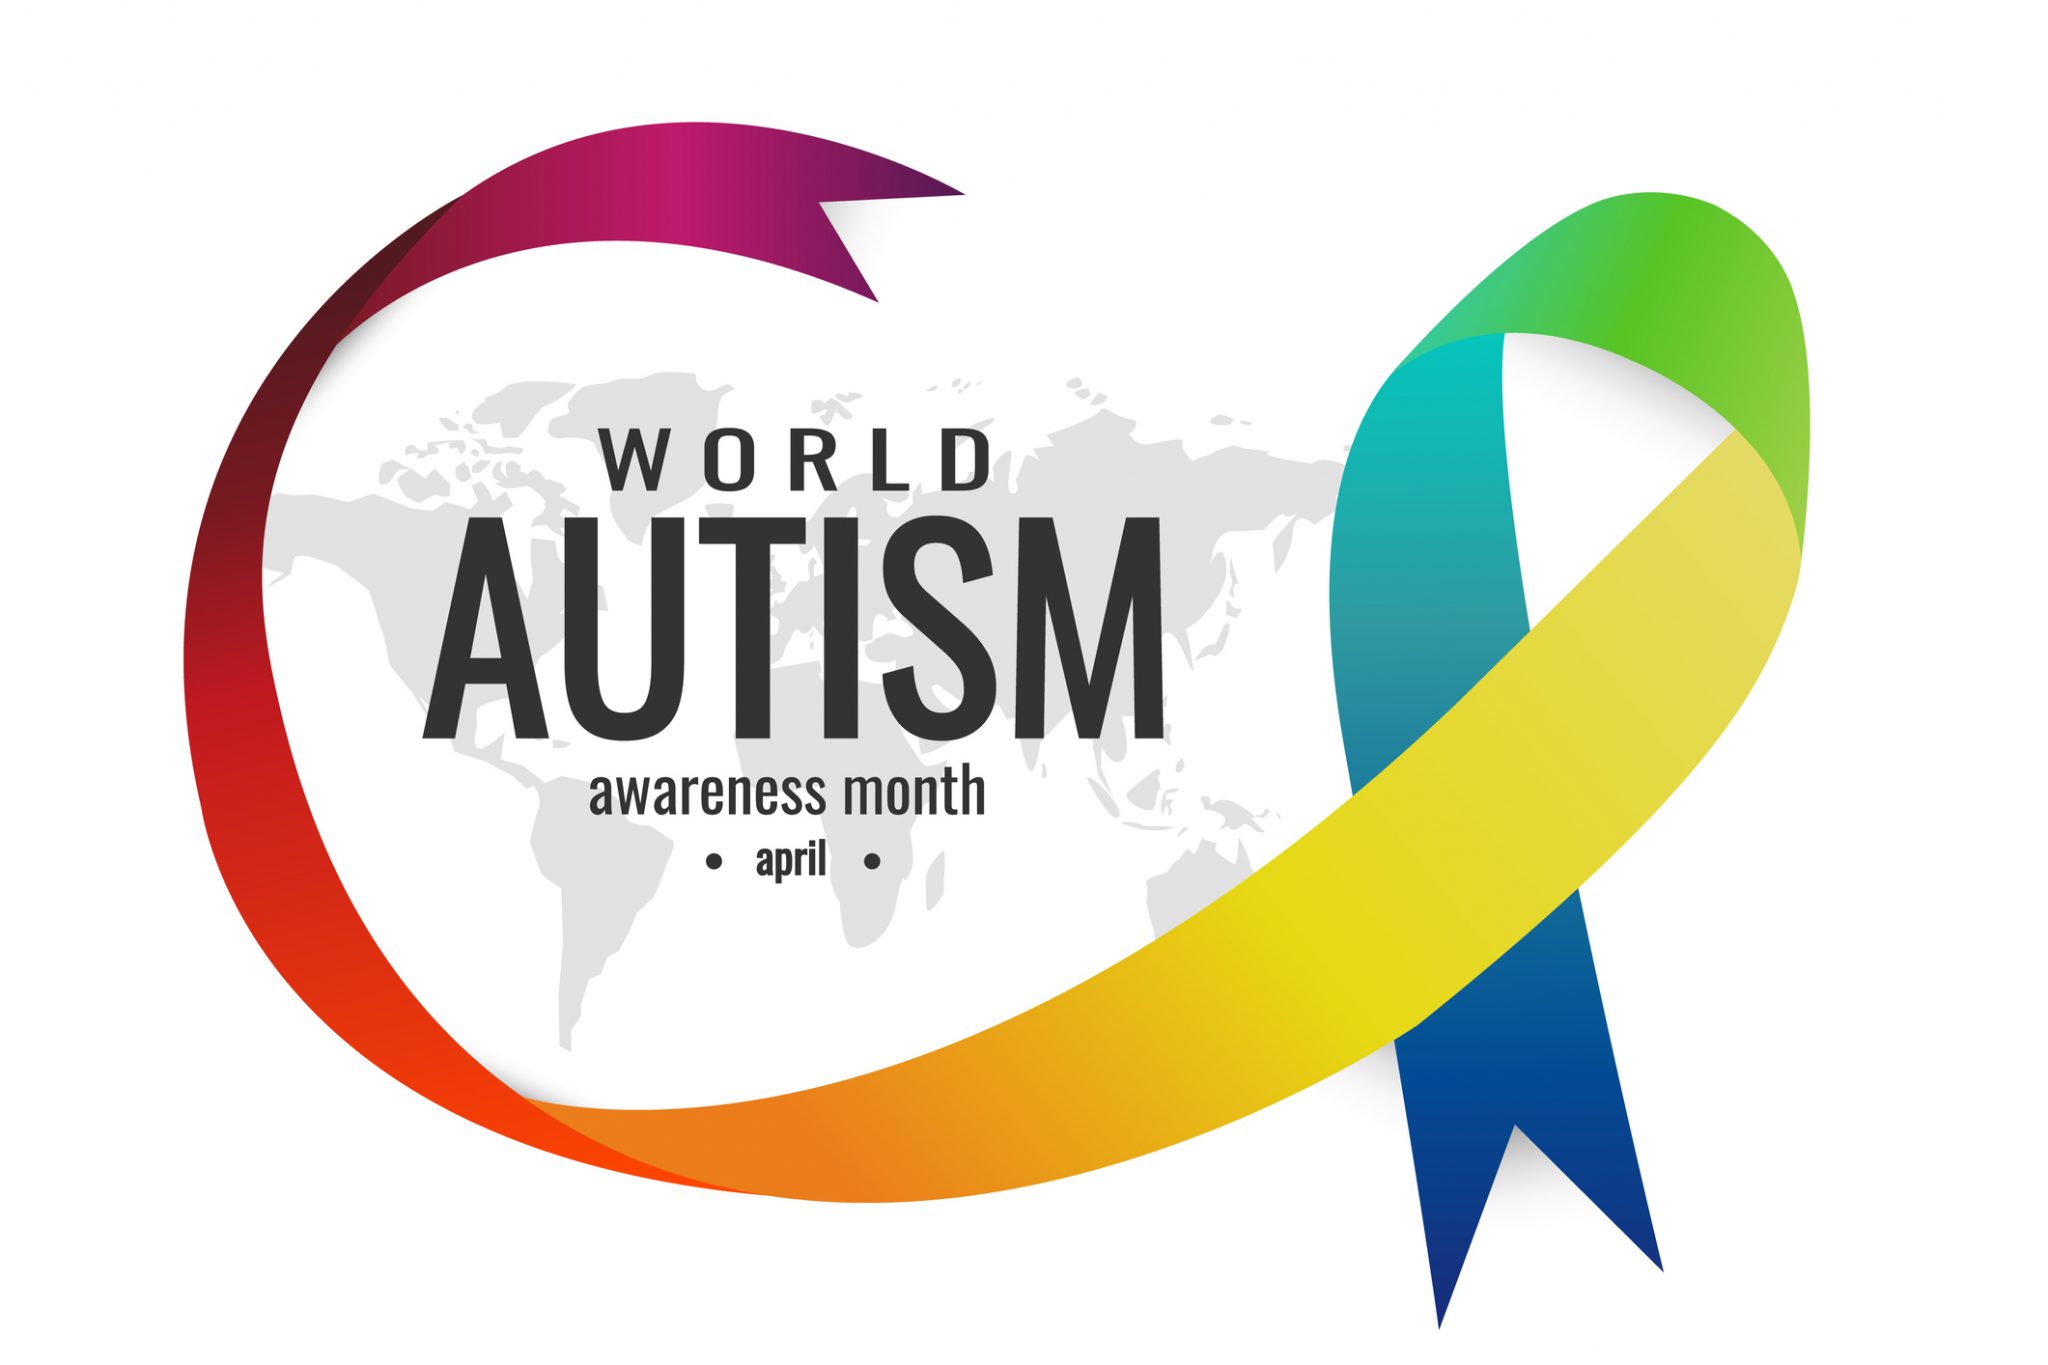 World Autism Month: Light Up with Kindness